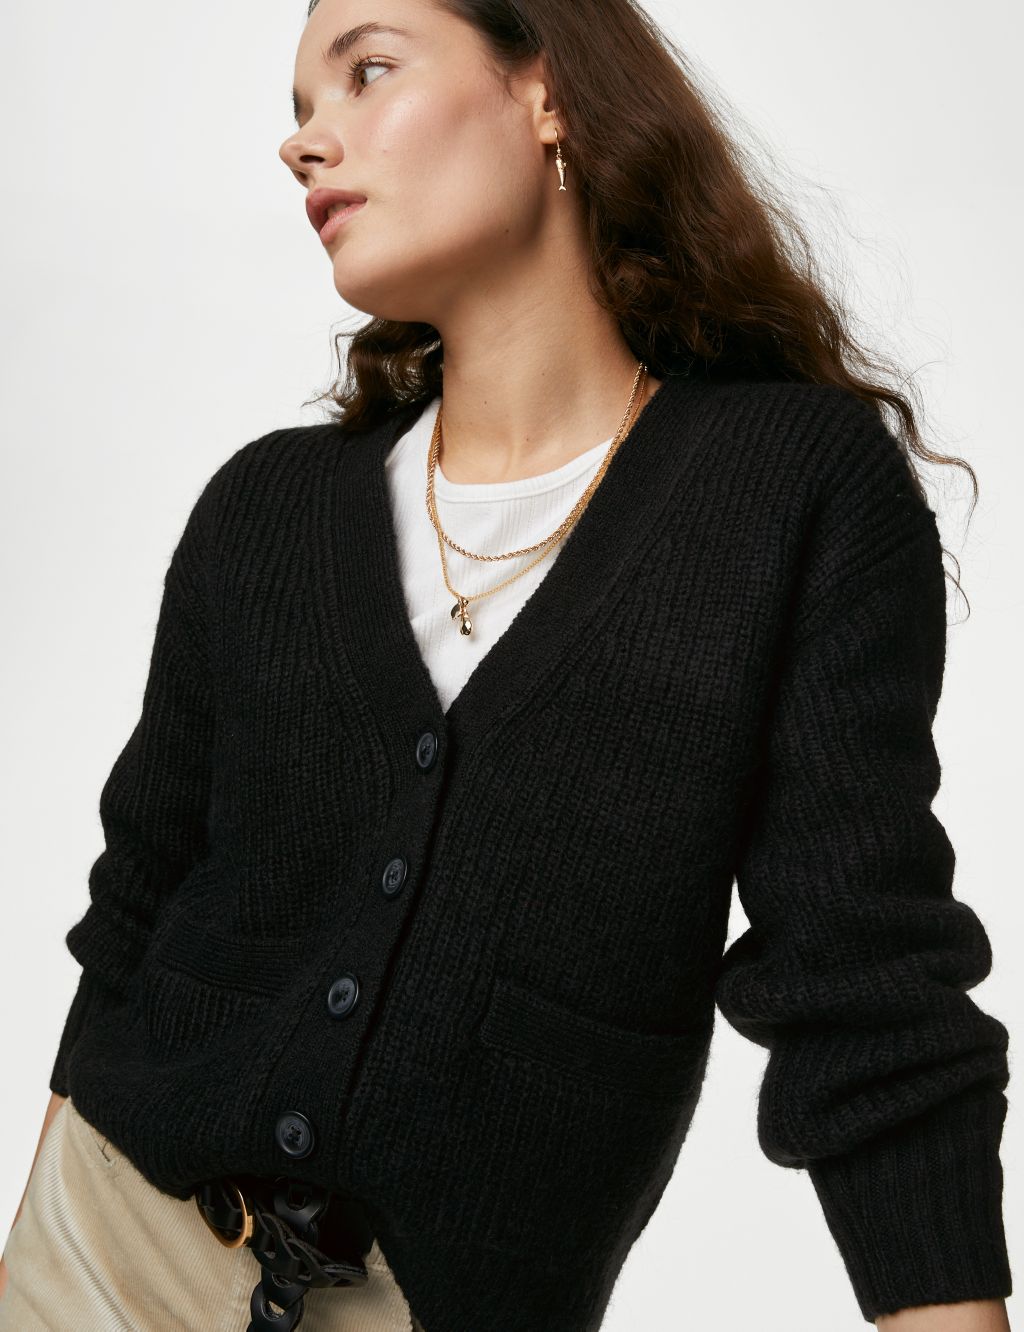 Knitted V-Neck Relaxed Cardigan with Wool image 1